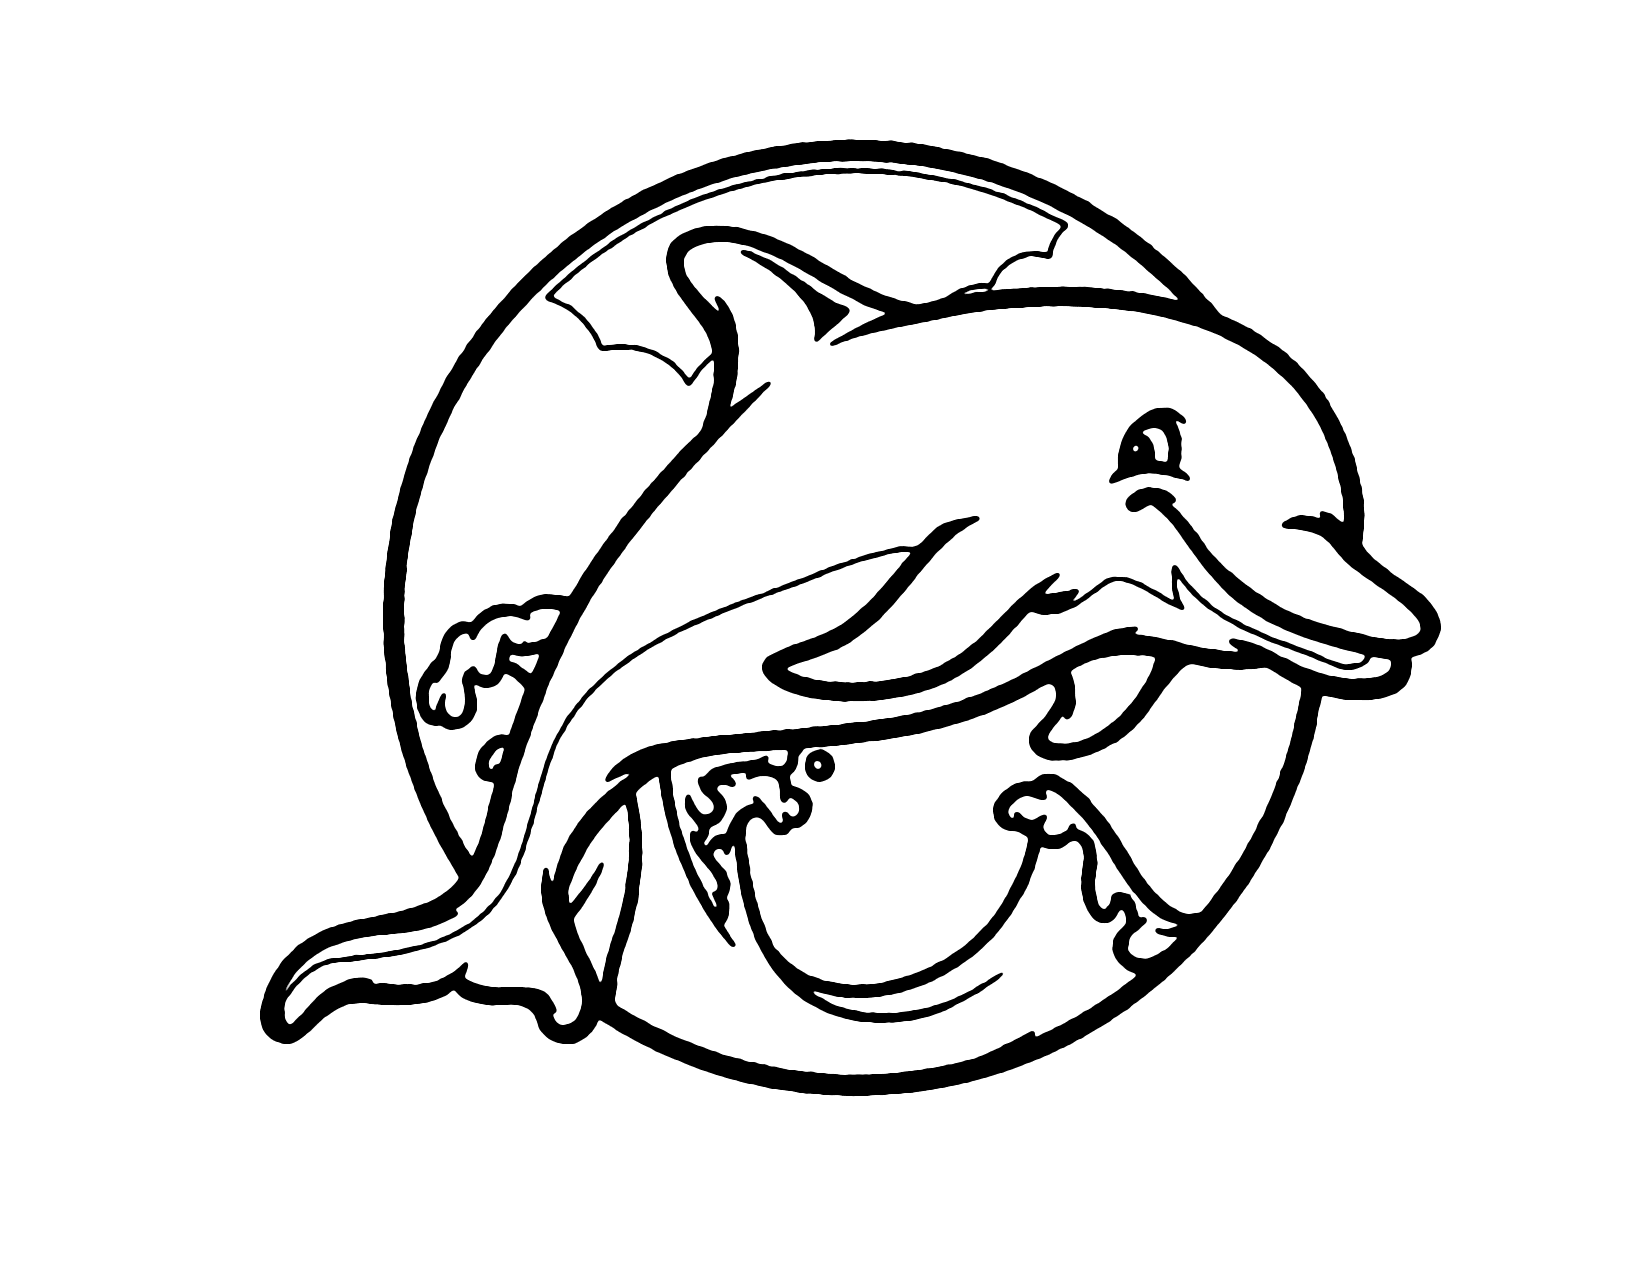 Happy Dolphin Coloring Page